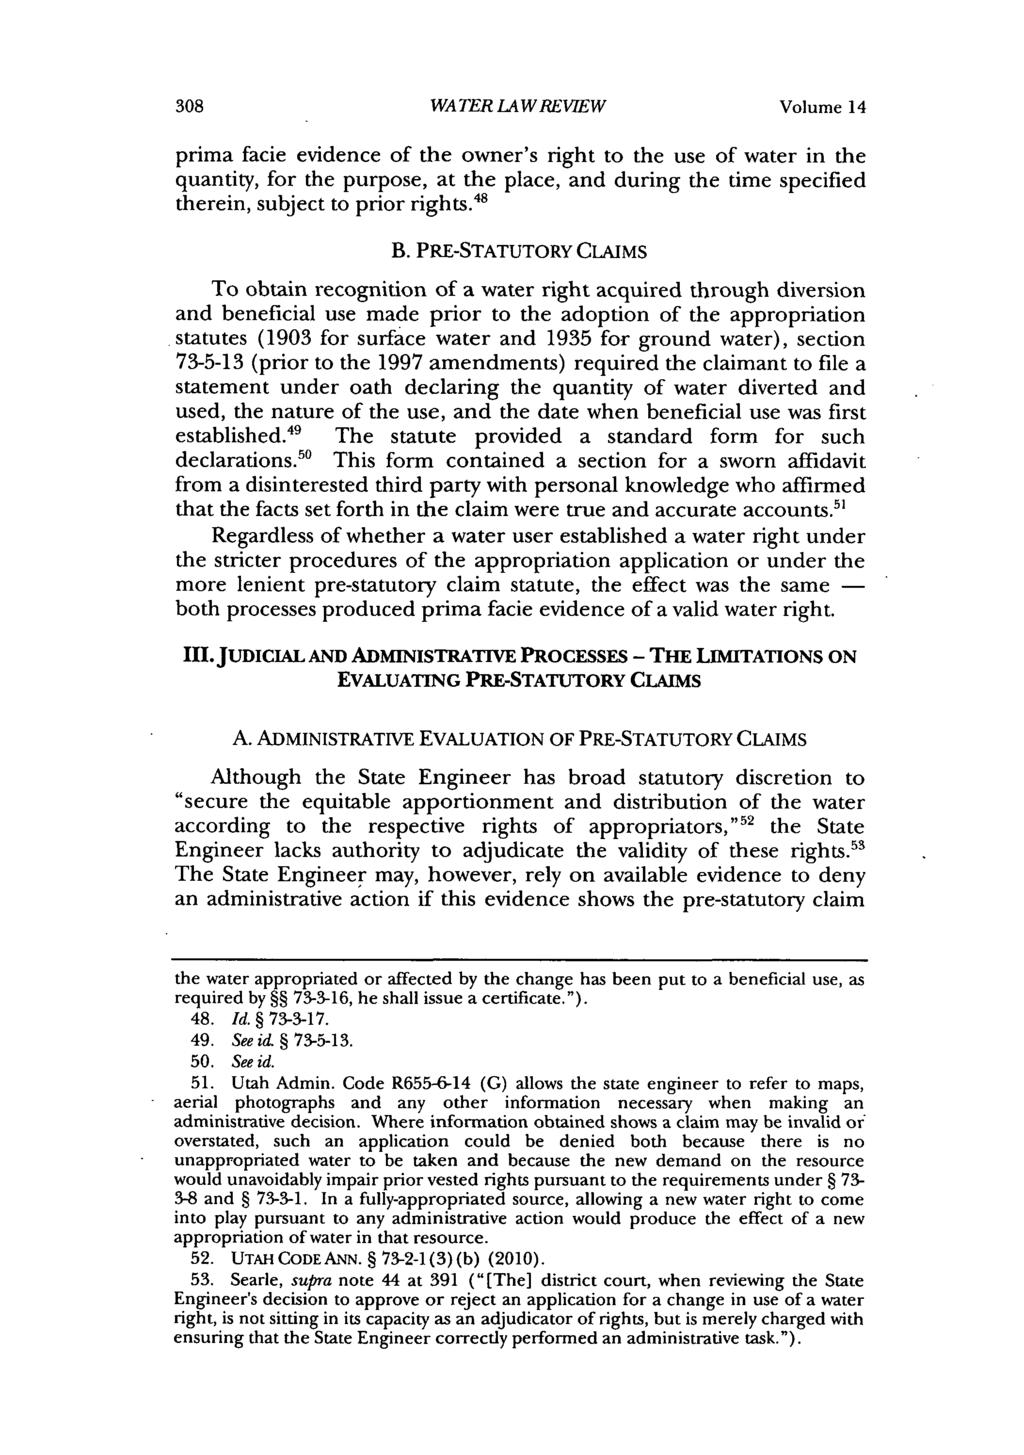 308 WATER LAWREVIEW Volume 14 prima facie evidence of the owner's right to the use of water in the quantity, for the purpose, at the place, and during the time specified therein, subject to prior